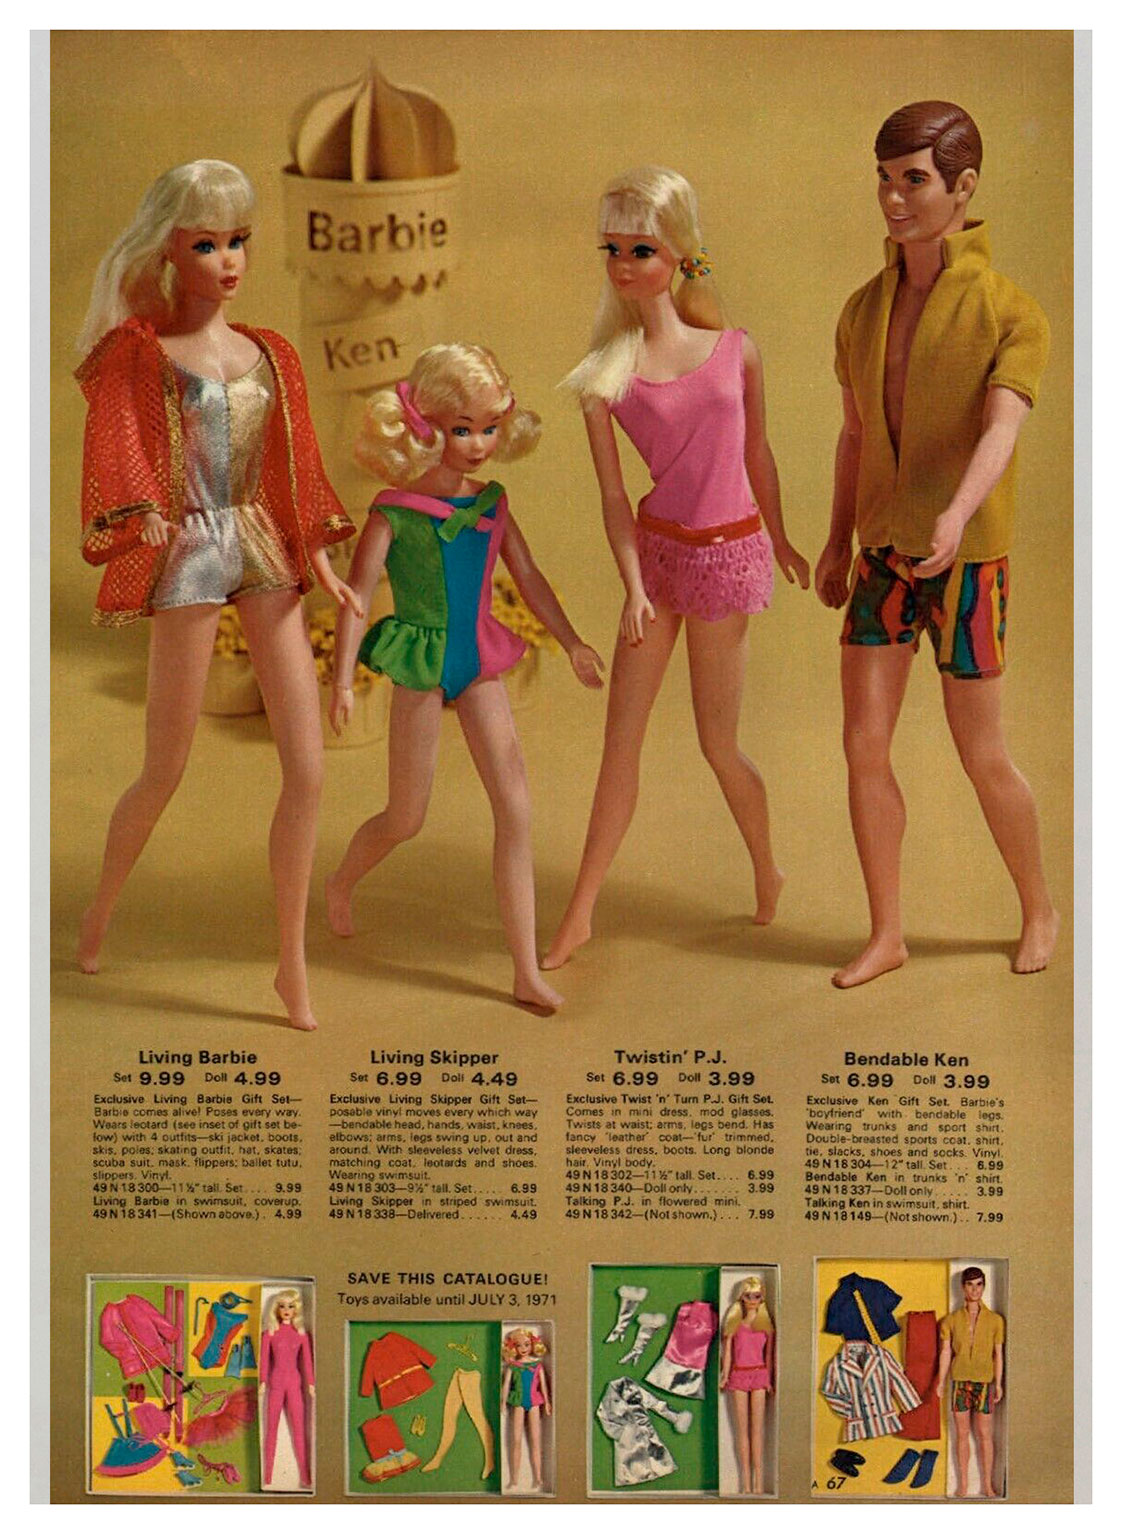 https://somethingabouttheboy.com/mod/1970-the-outfits/1970_canadian_sears_christmas_wish_book_01/